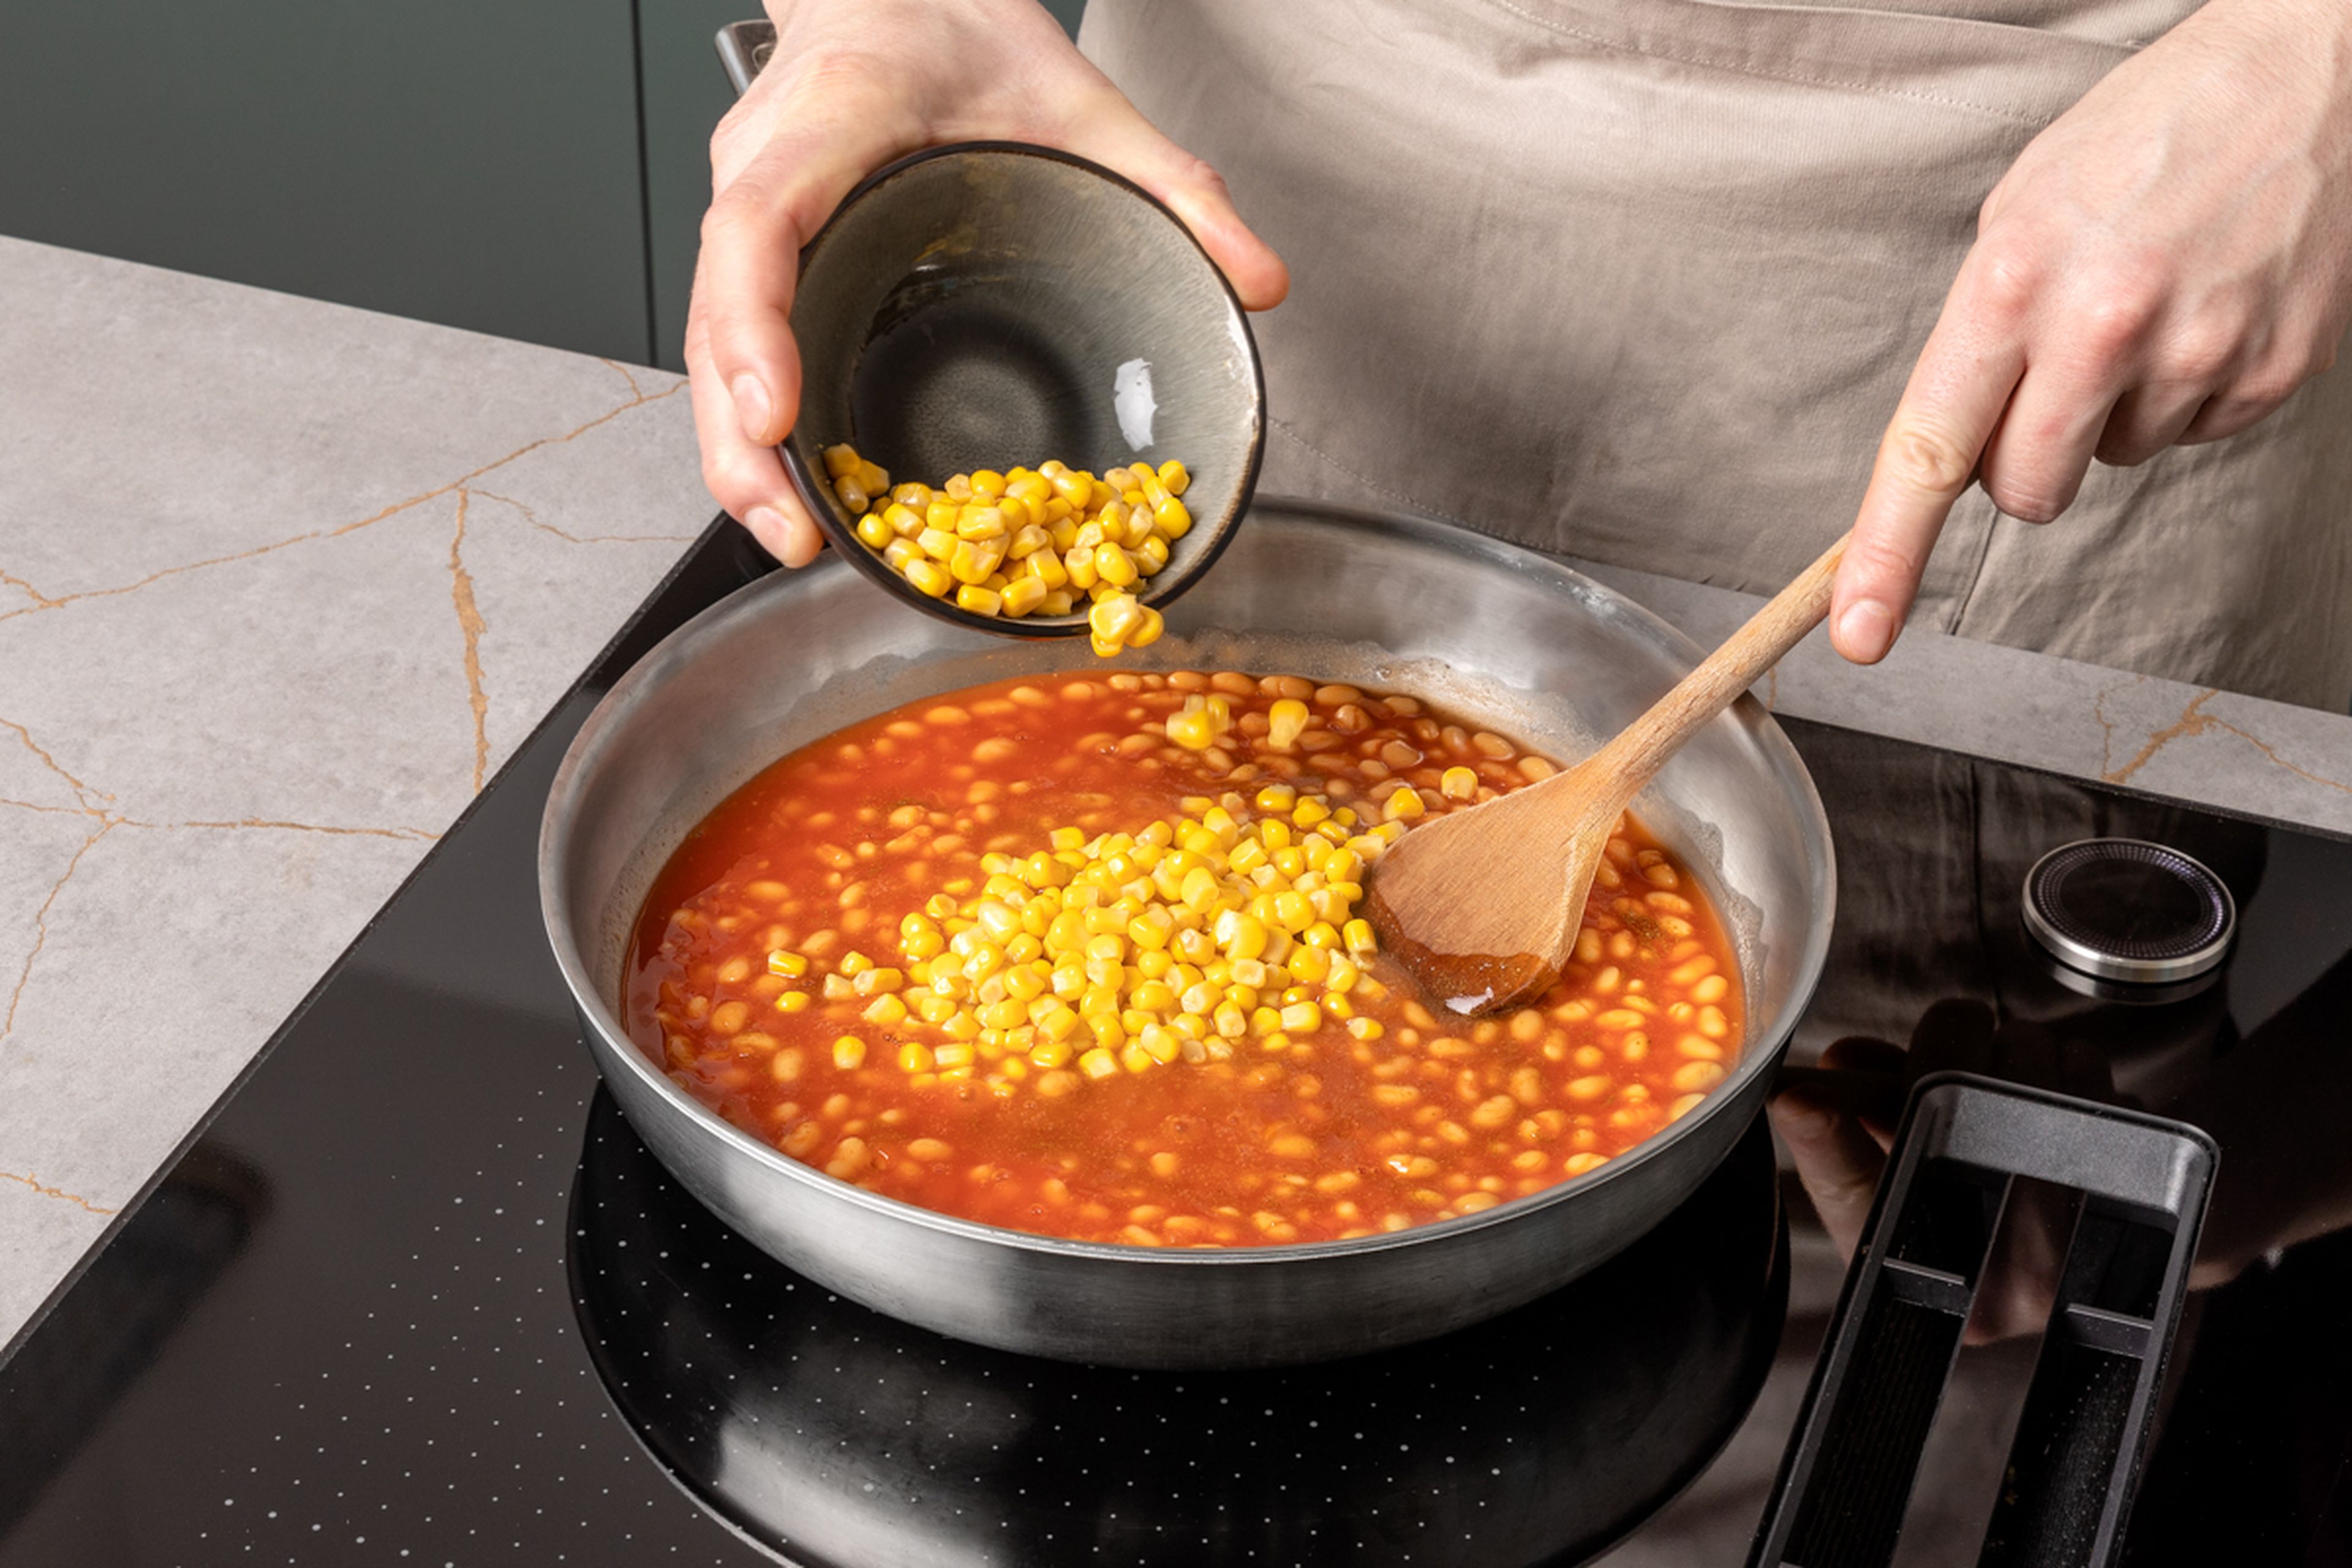 In the meantime, finely chop garlic. Heat oil in a large frying pan and sweat garlic in it for approx. 1 min. until translucent. Add baked beans, drained corn, and cumin and simmer together for approx. 2–3 min. Season to taste with salt and pepper.